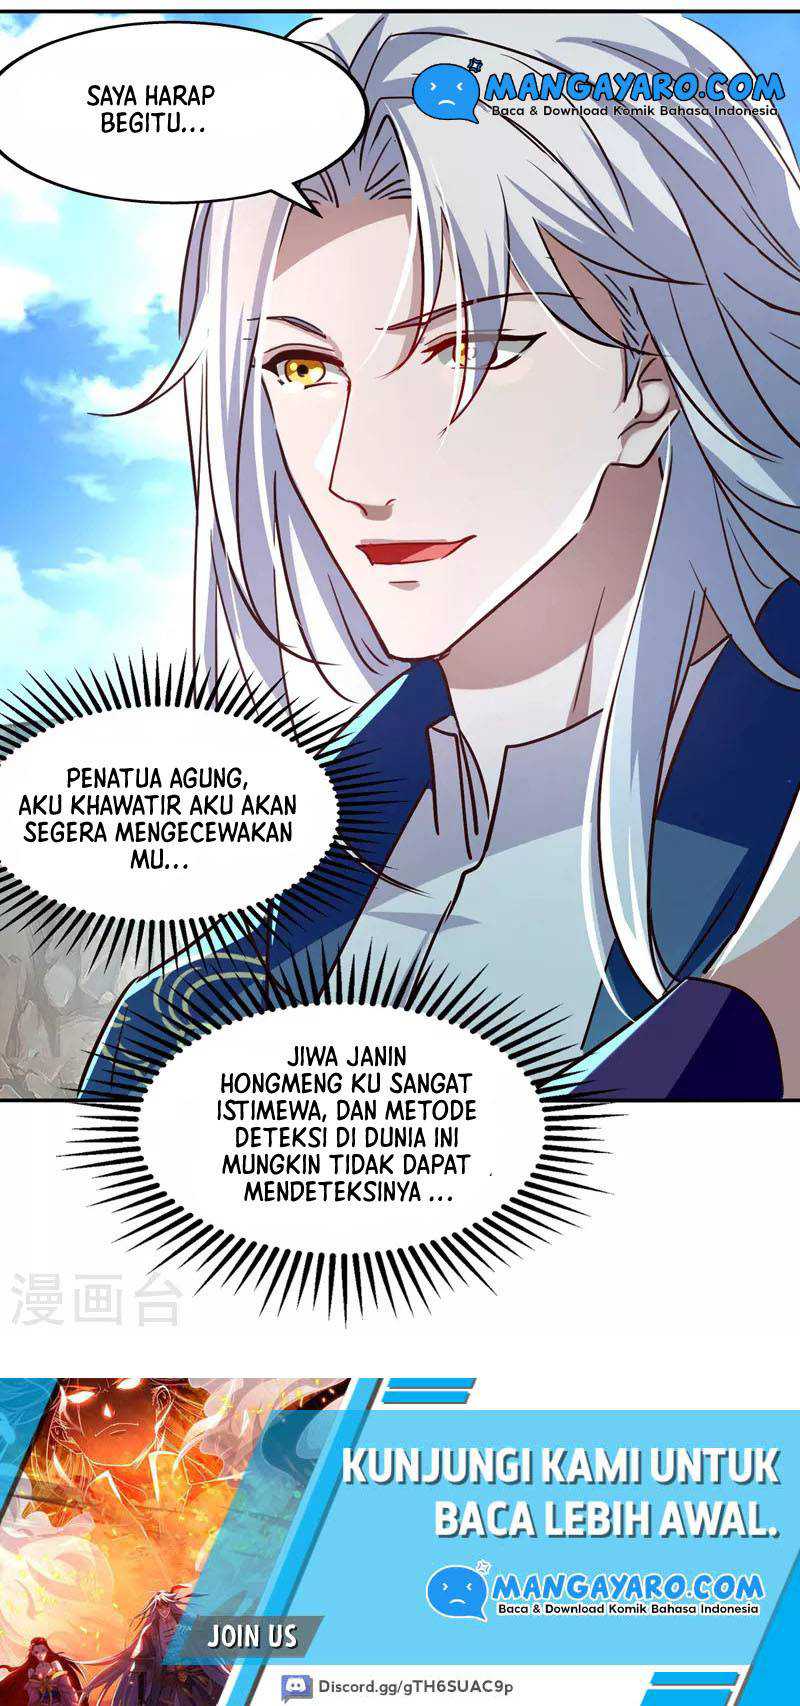 Against The Heaven Supreme (Heaven Guards) Chapter 82 - 169